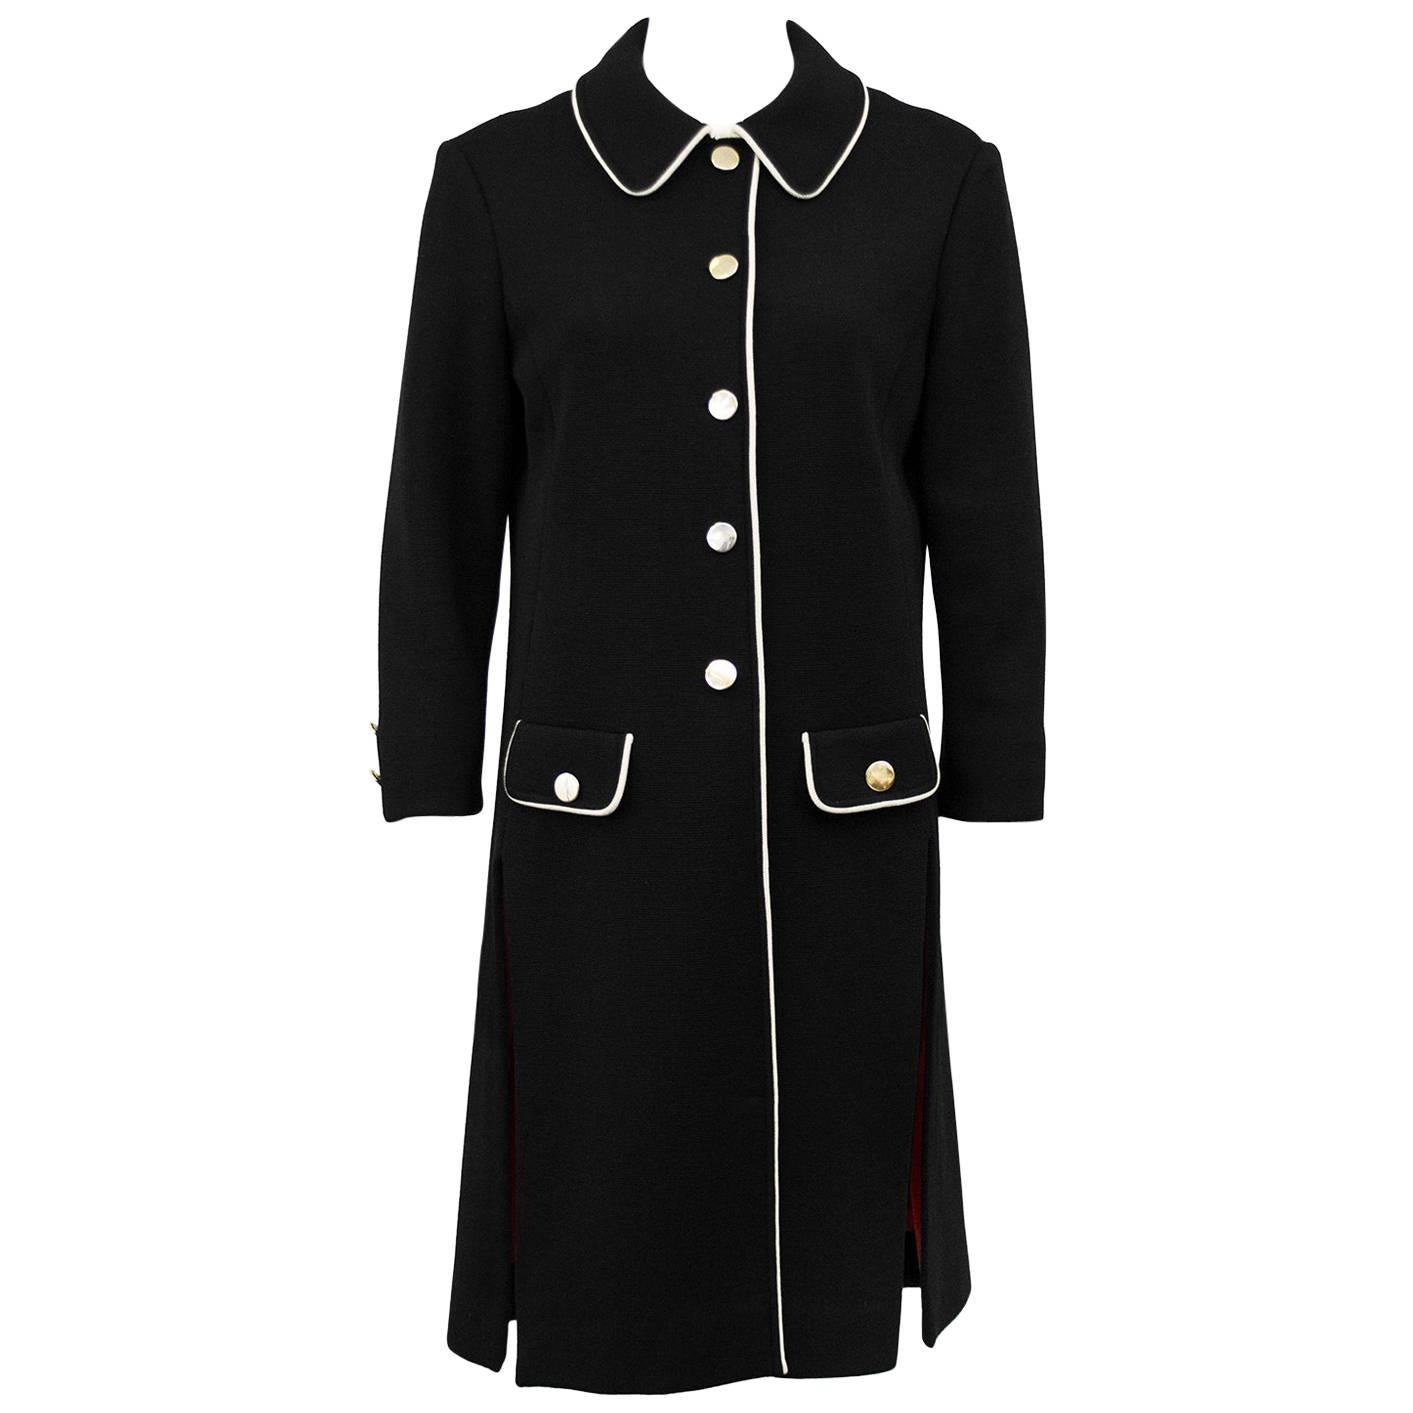 1970s Carnaby Black Mod Look Knit Coat with Cream Trim 